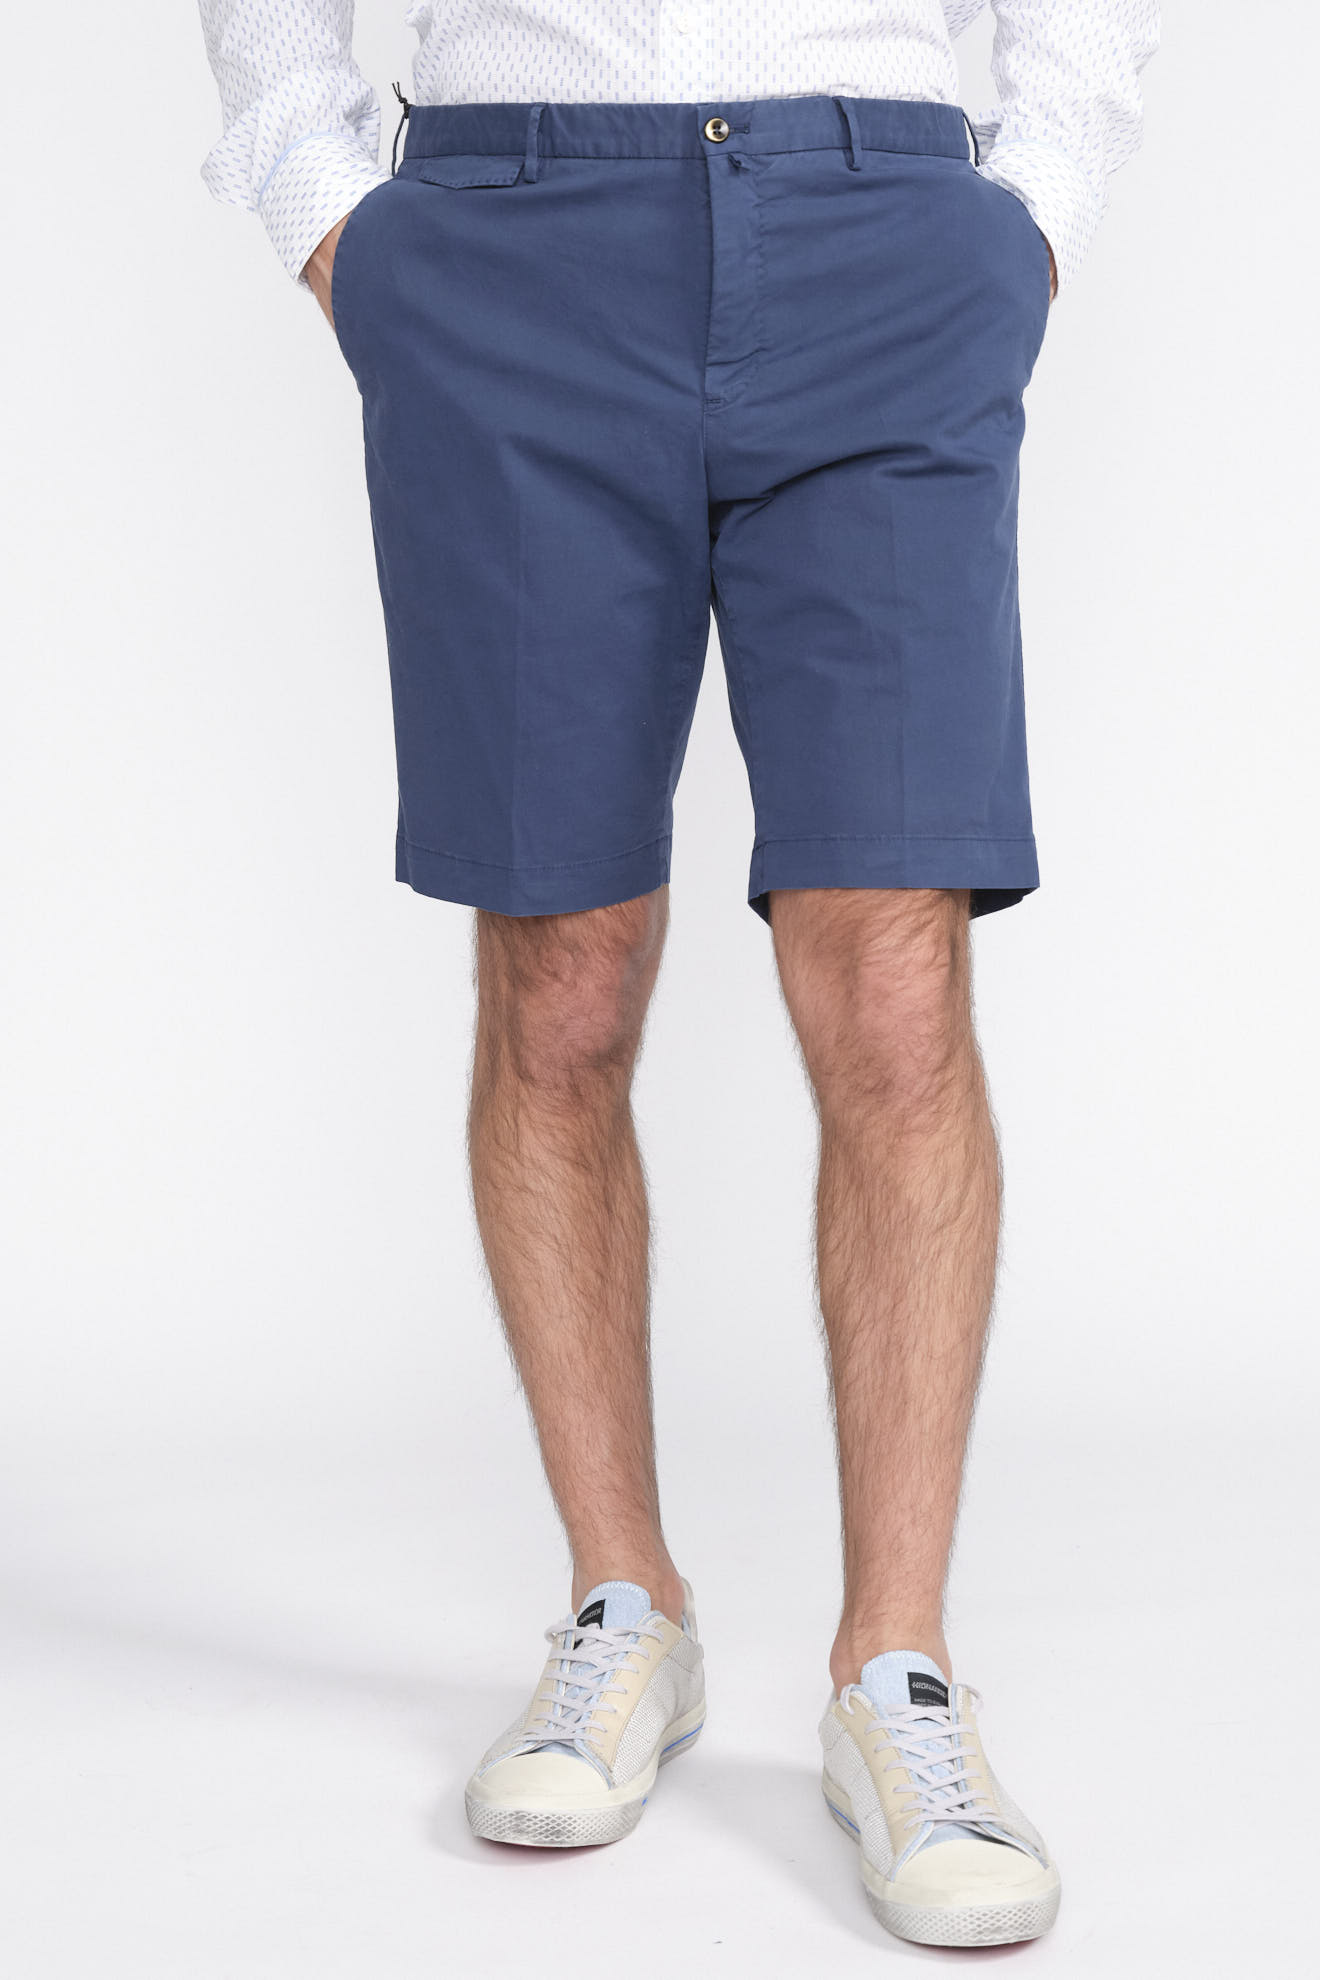 PT Torino Bermuda shorts with button placket and patch pockets blue 52